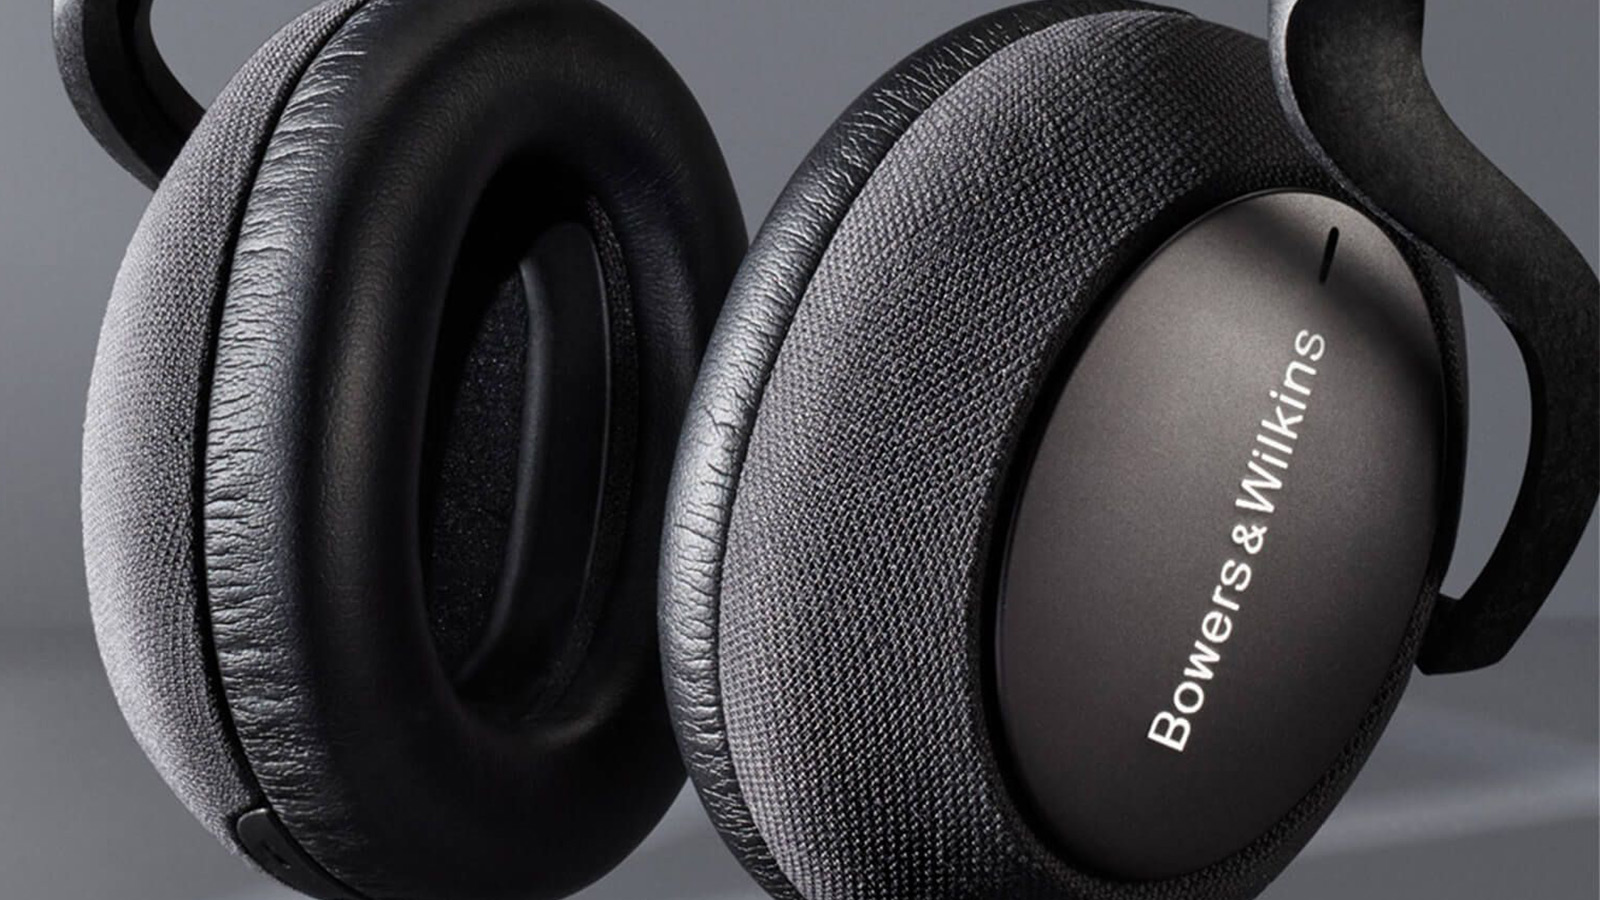 Bowers & Wilkins PX7 Design